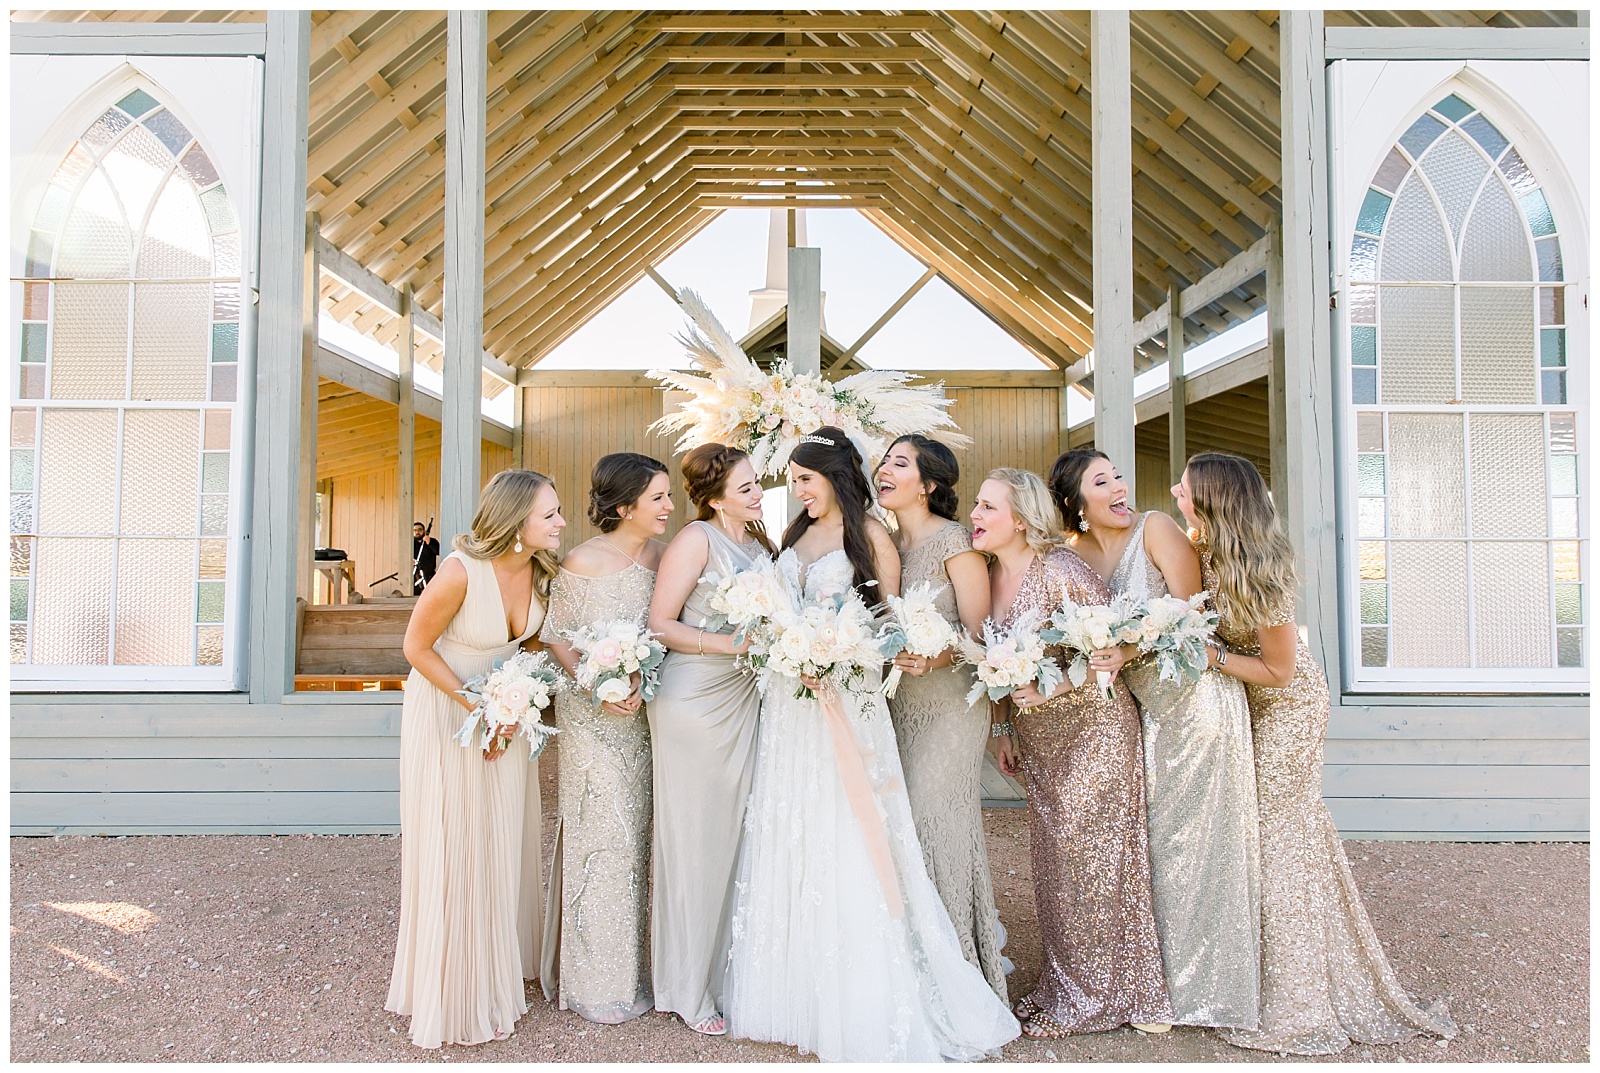 Bride and bridesmaids laughing in front of alter for a Romantic Wedding at The Allen Farmhaus in New Braunfels, TX | San Antonio-Maui-Destination Wedding Photographer | Monica Roberts Photography | www.monicaroberts.com